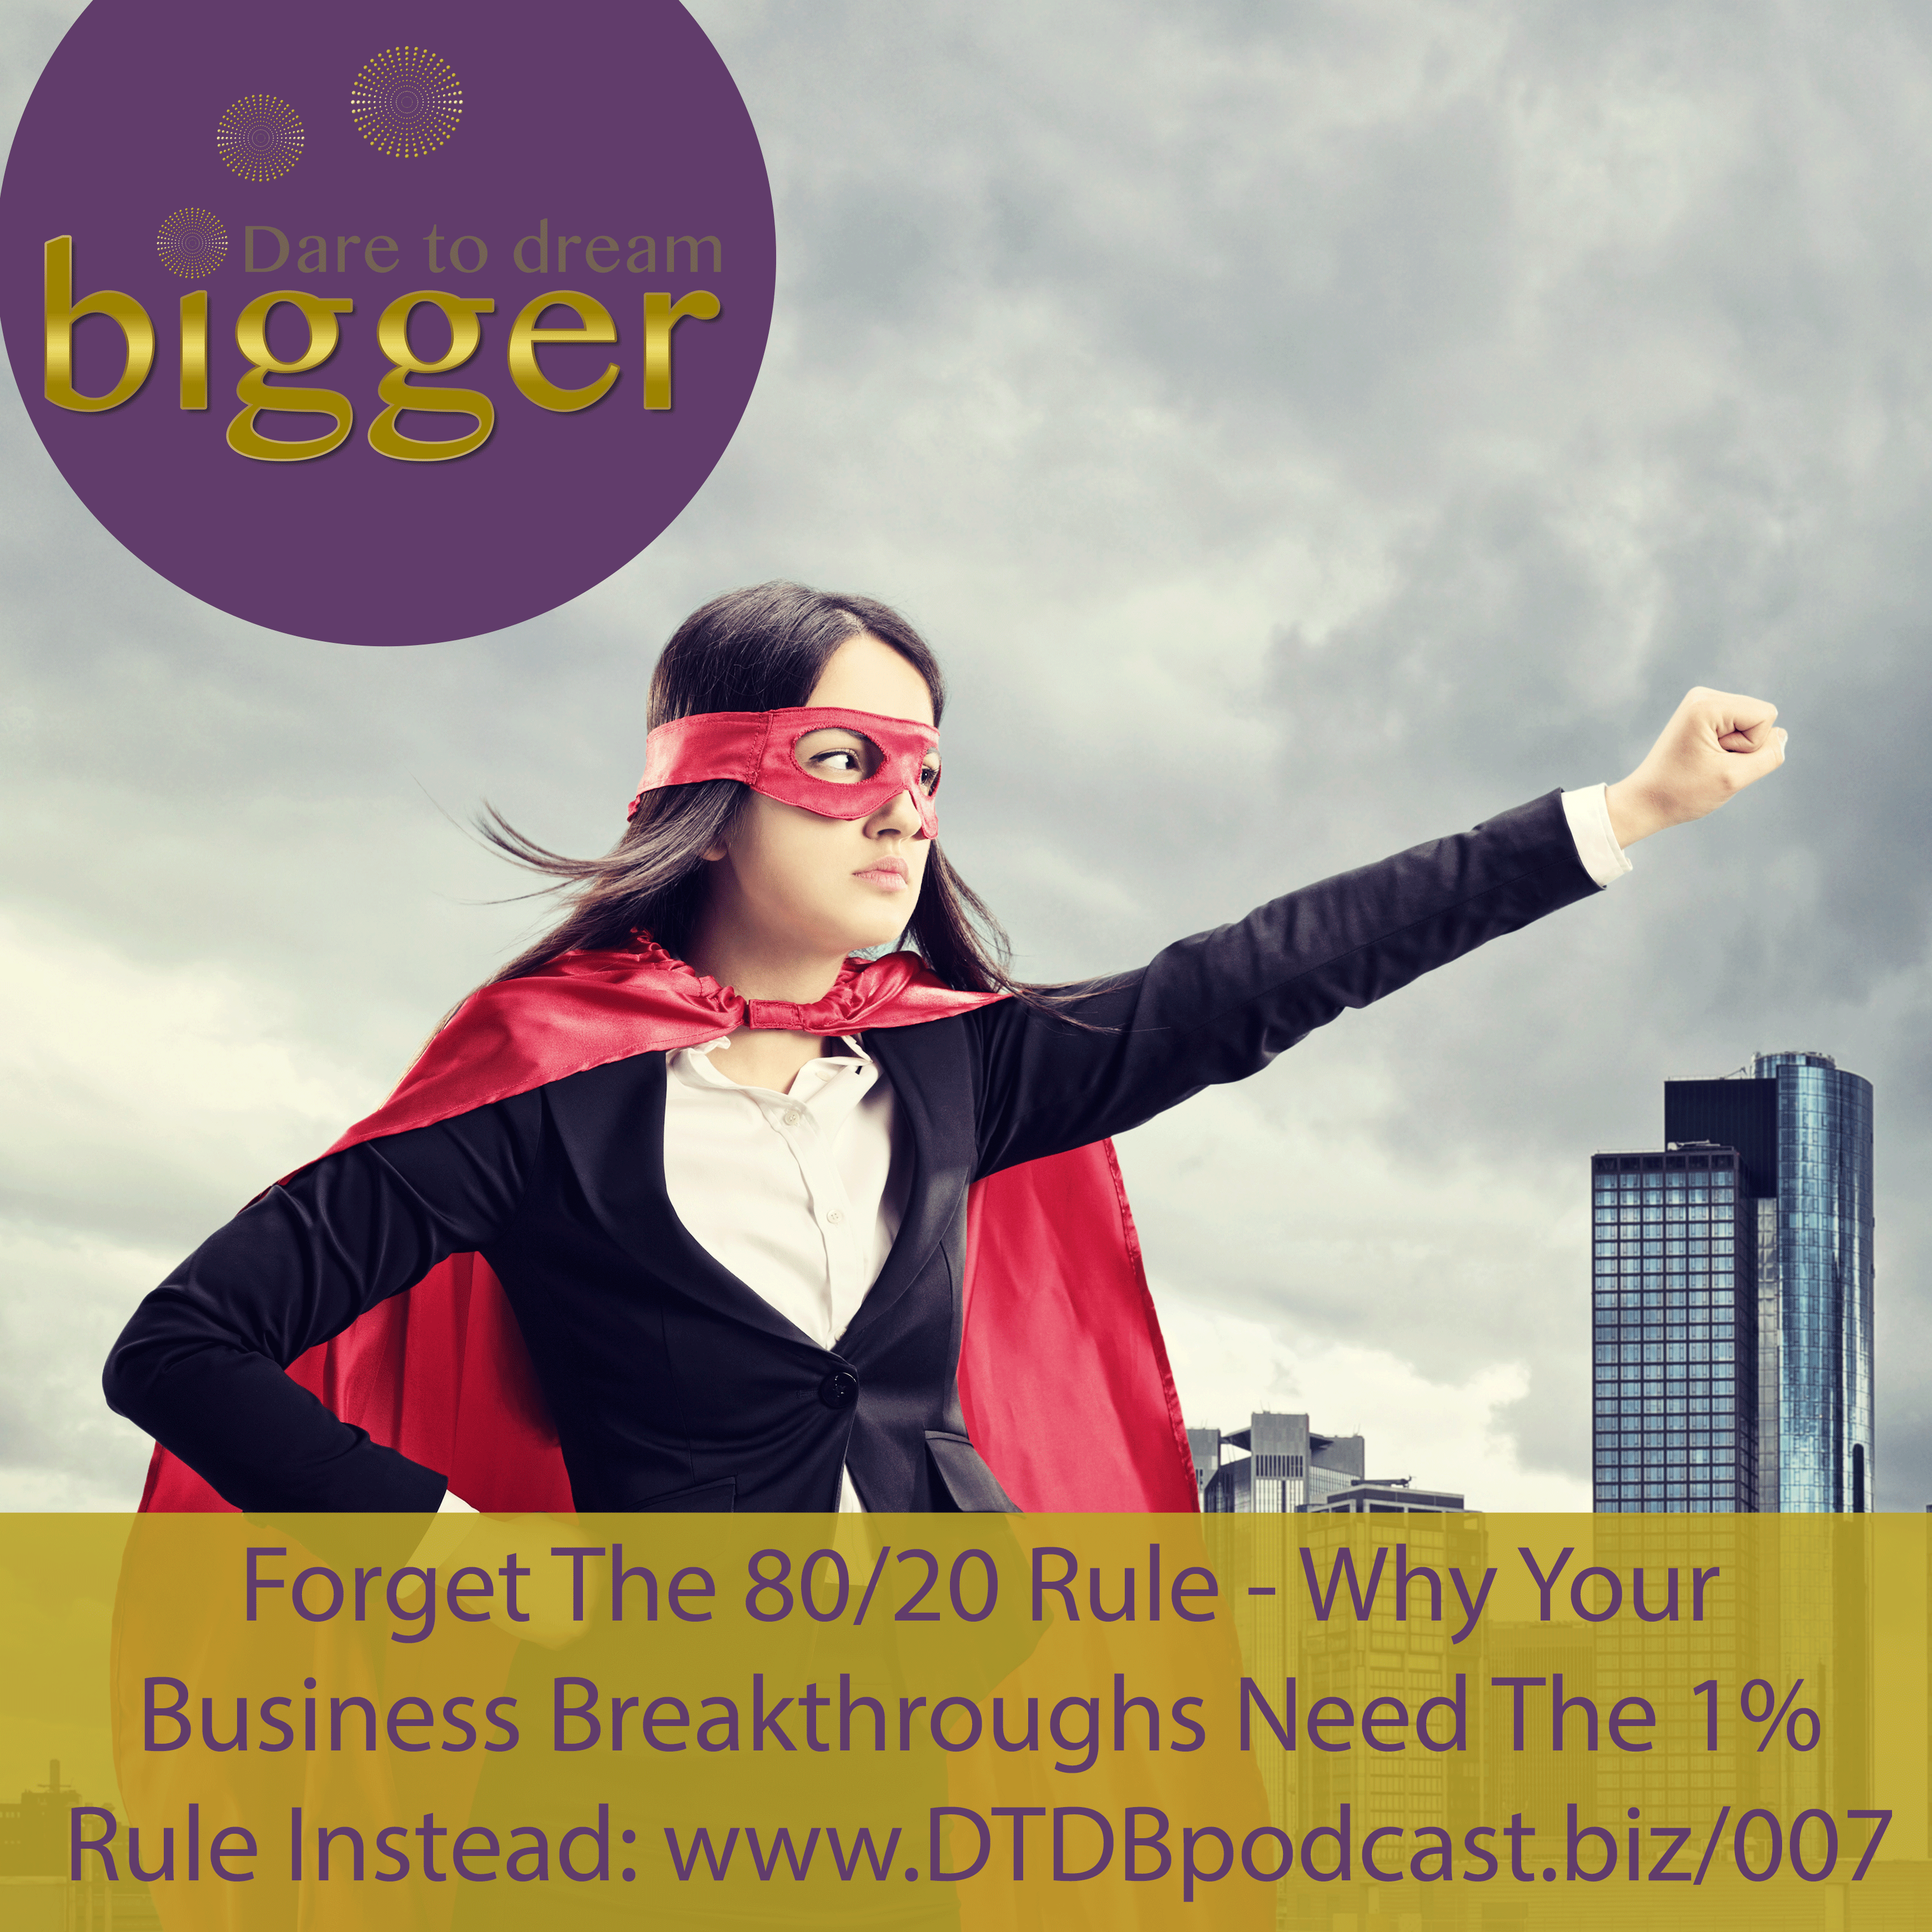 Forget the 80/20 rule - Why your business breakthroughs need the 1% rule, instead: www.DTDBpodcast.biz/007